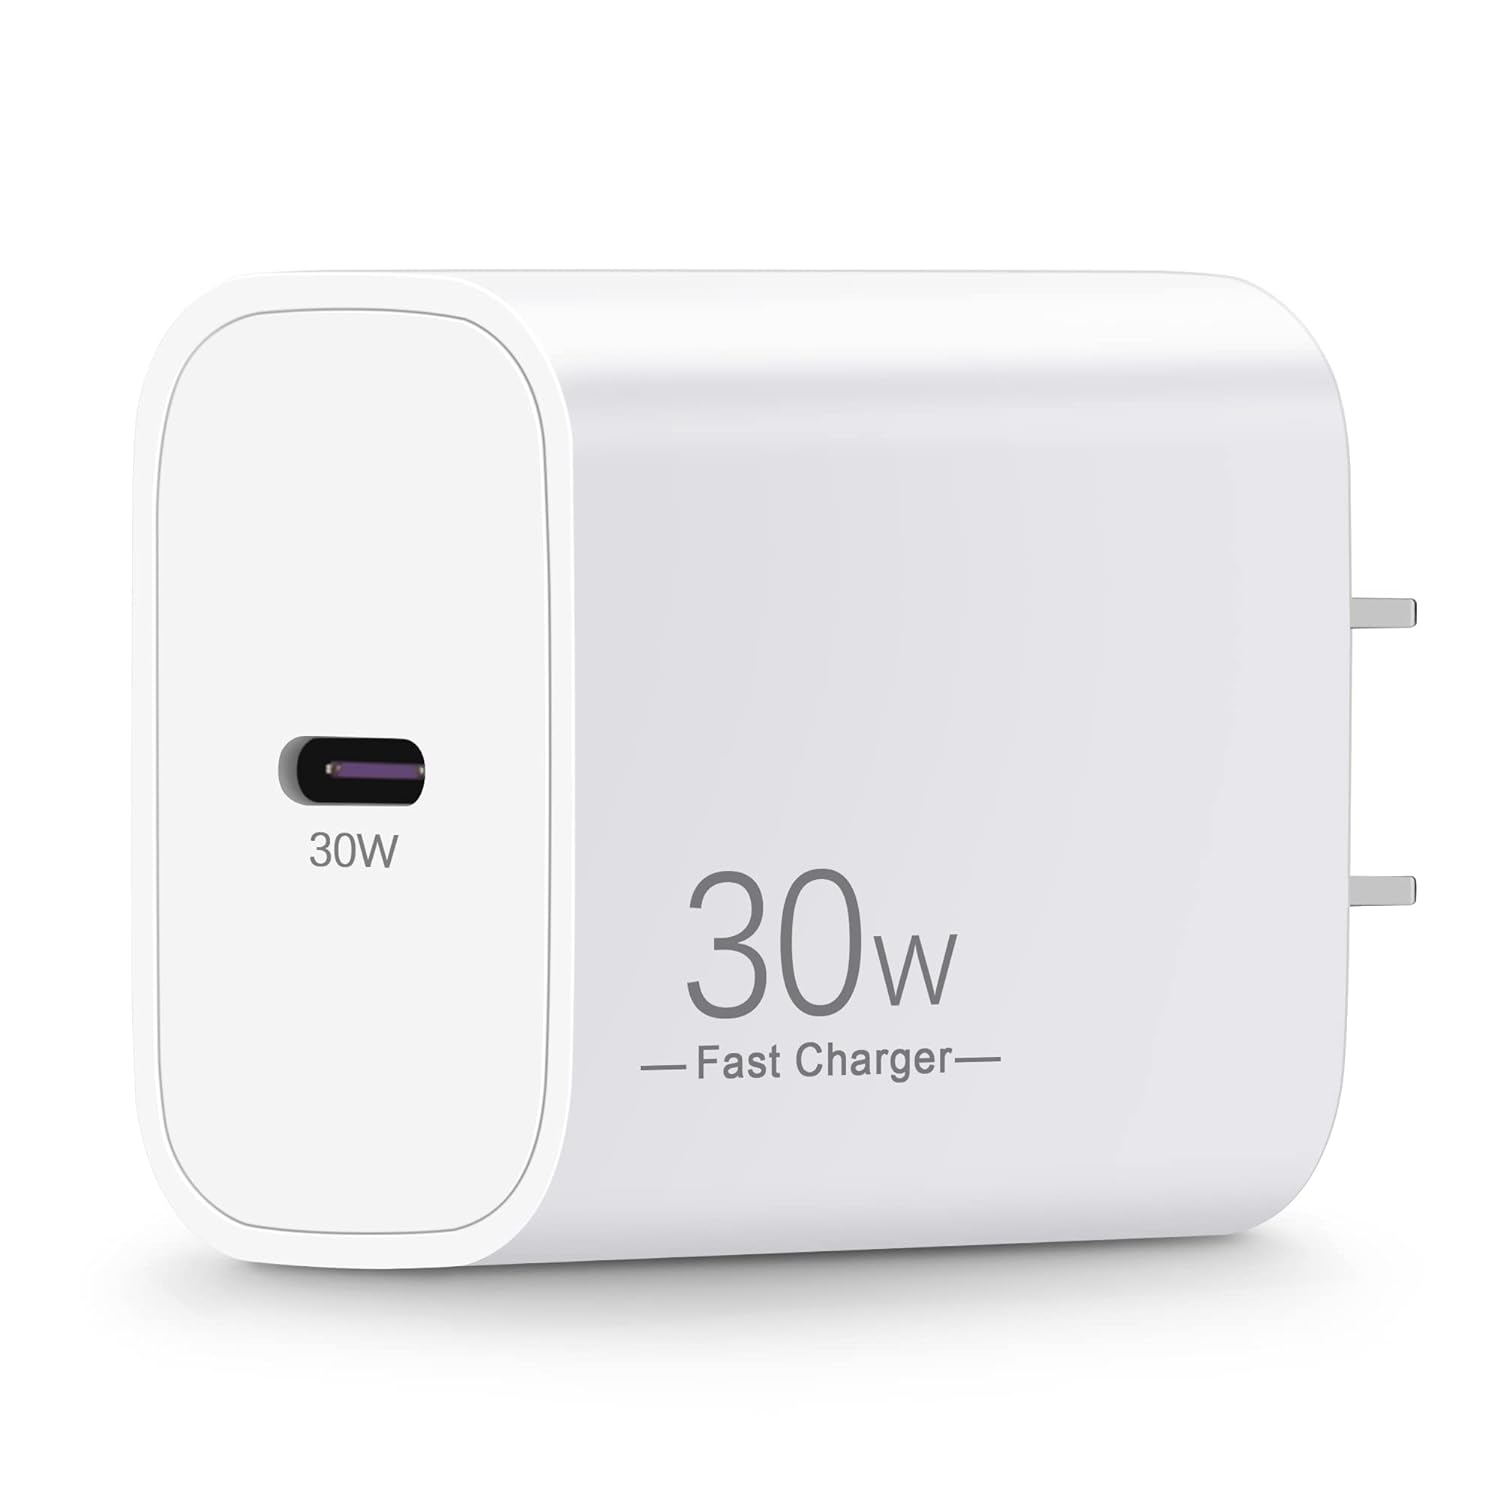 30W Fast Charger for iPhone/iPad: USB C Fast Wall Charger Plug, Type-C Charging Block Power Adapter